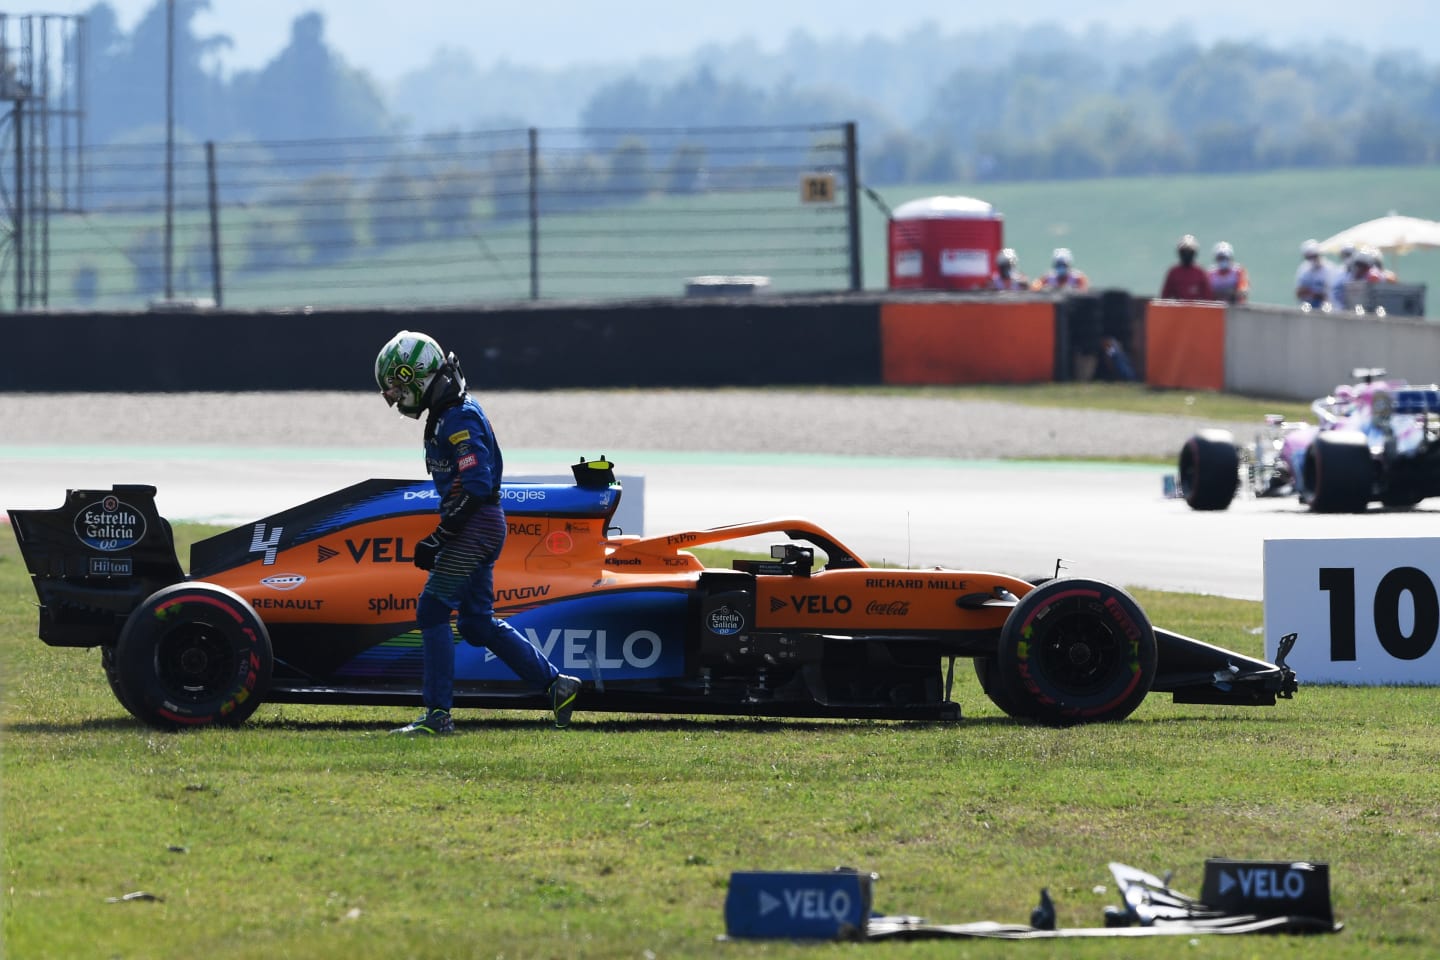 SCARPERIA, ITALY - SEPTEMBER 11: Lando Norris of Great Britain and McLaren F1 spins during practice ahead of the F1 Grand Prix of Tuscany at Mugello Circuit on September 11, 2020 in Scarperia, Italy. (Photo by Claudio Giovannini - Pool/Getty Images)